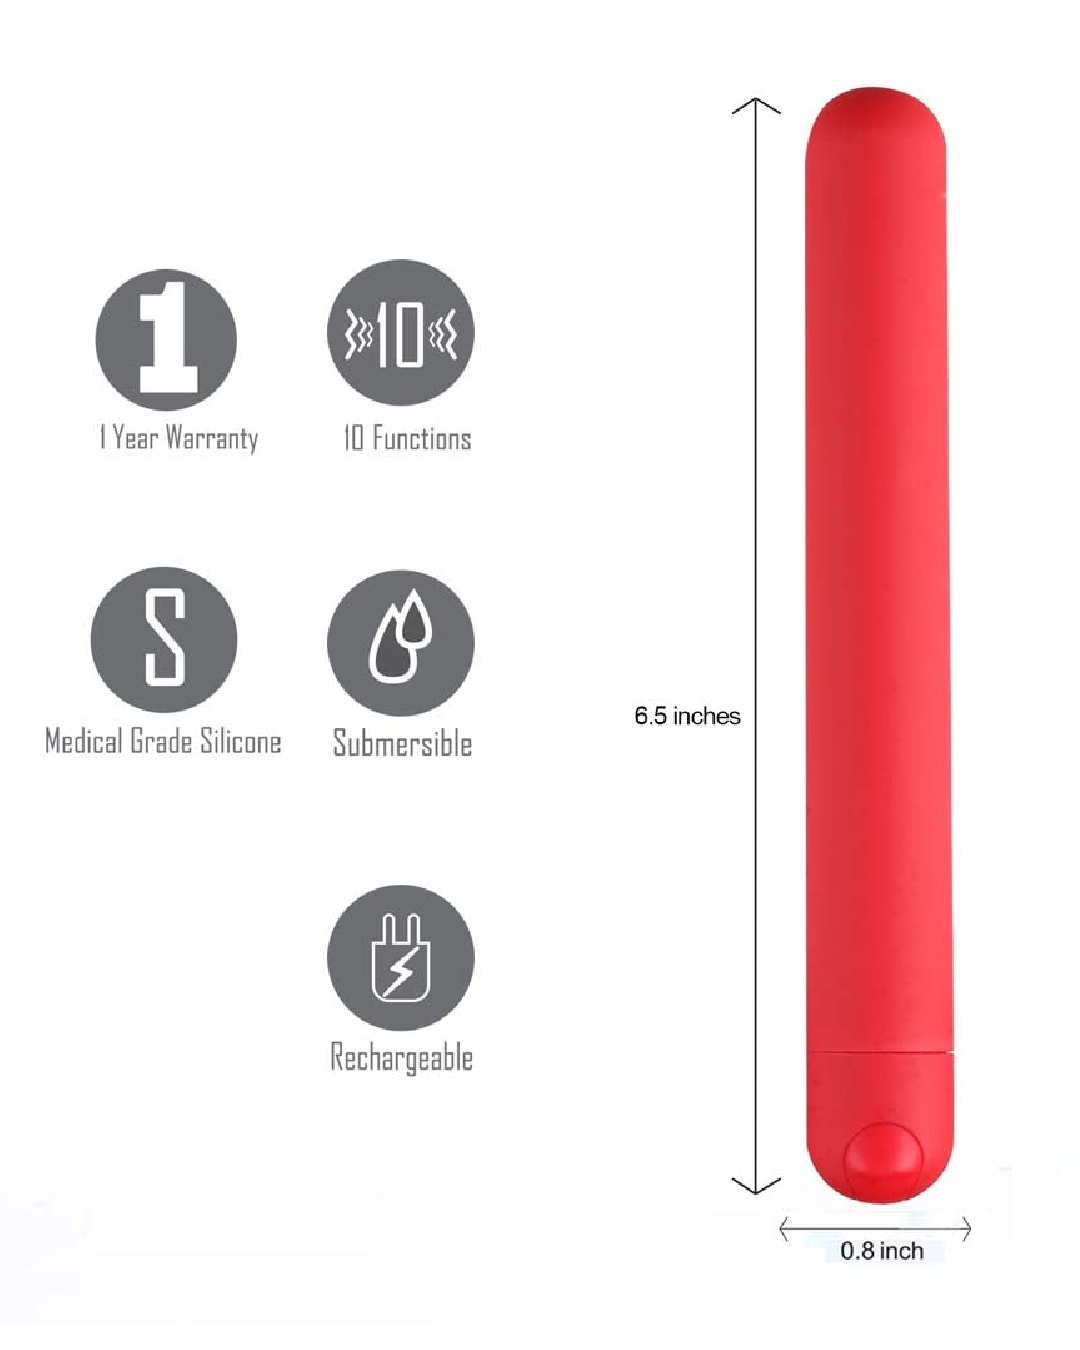 Abbie X-Long Super Charged Red Bullet Vibrator with measurements